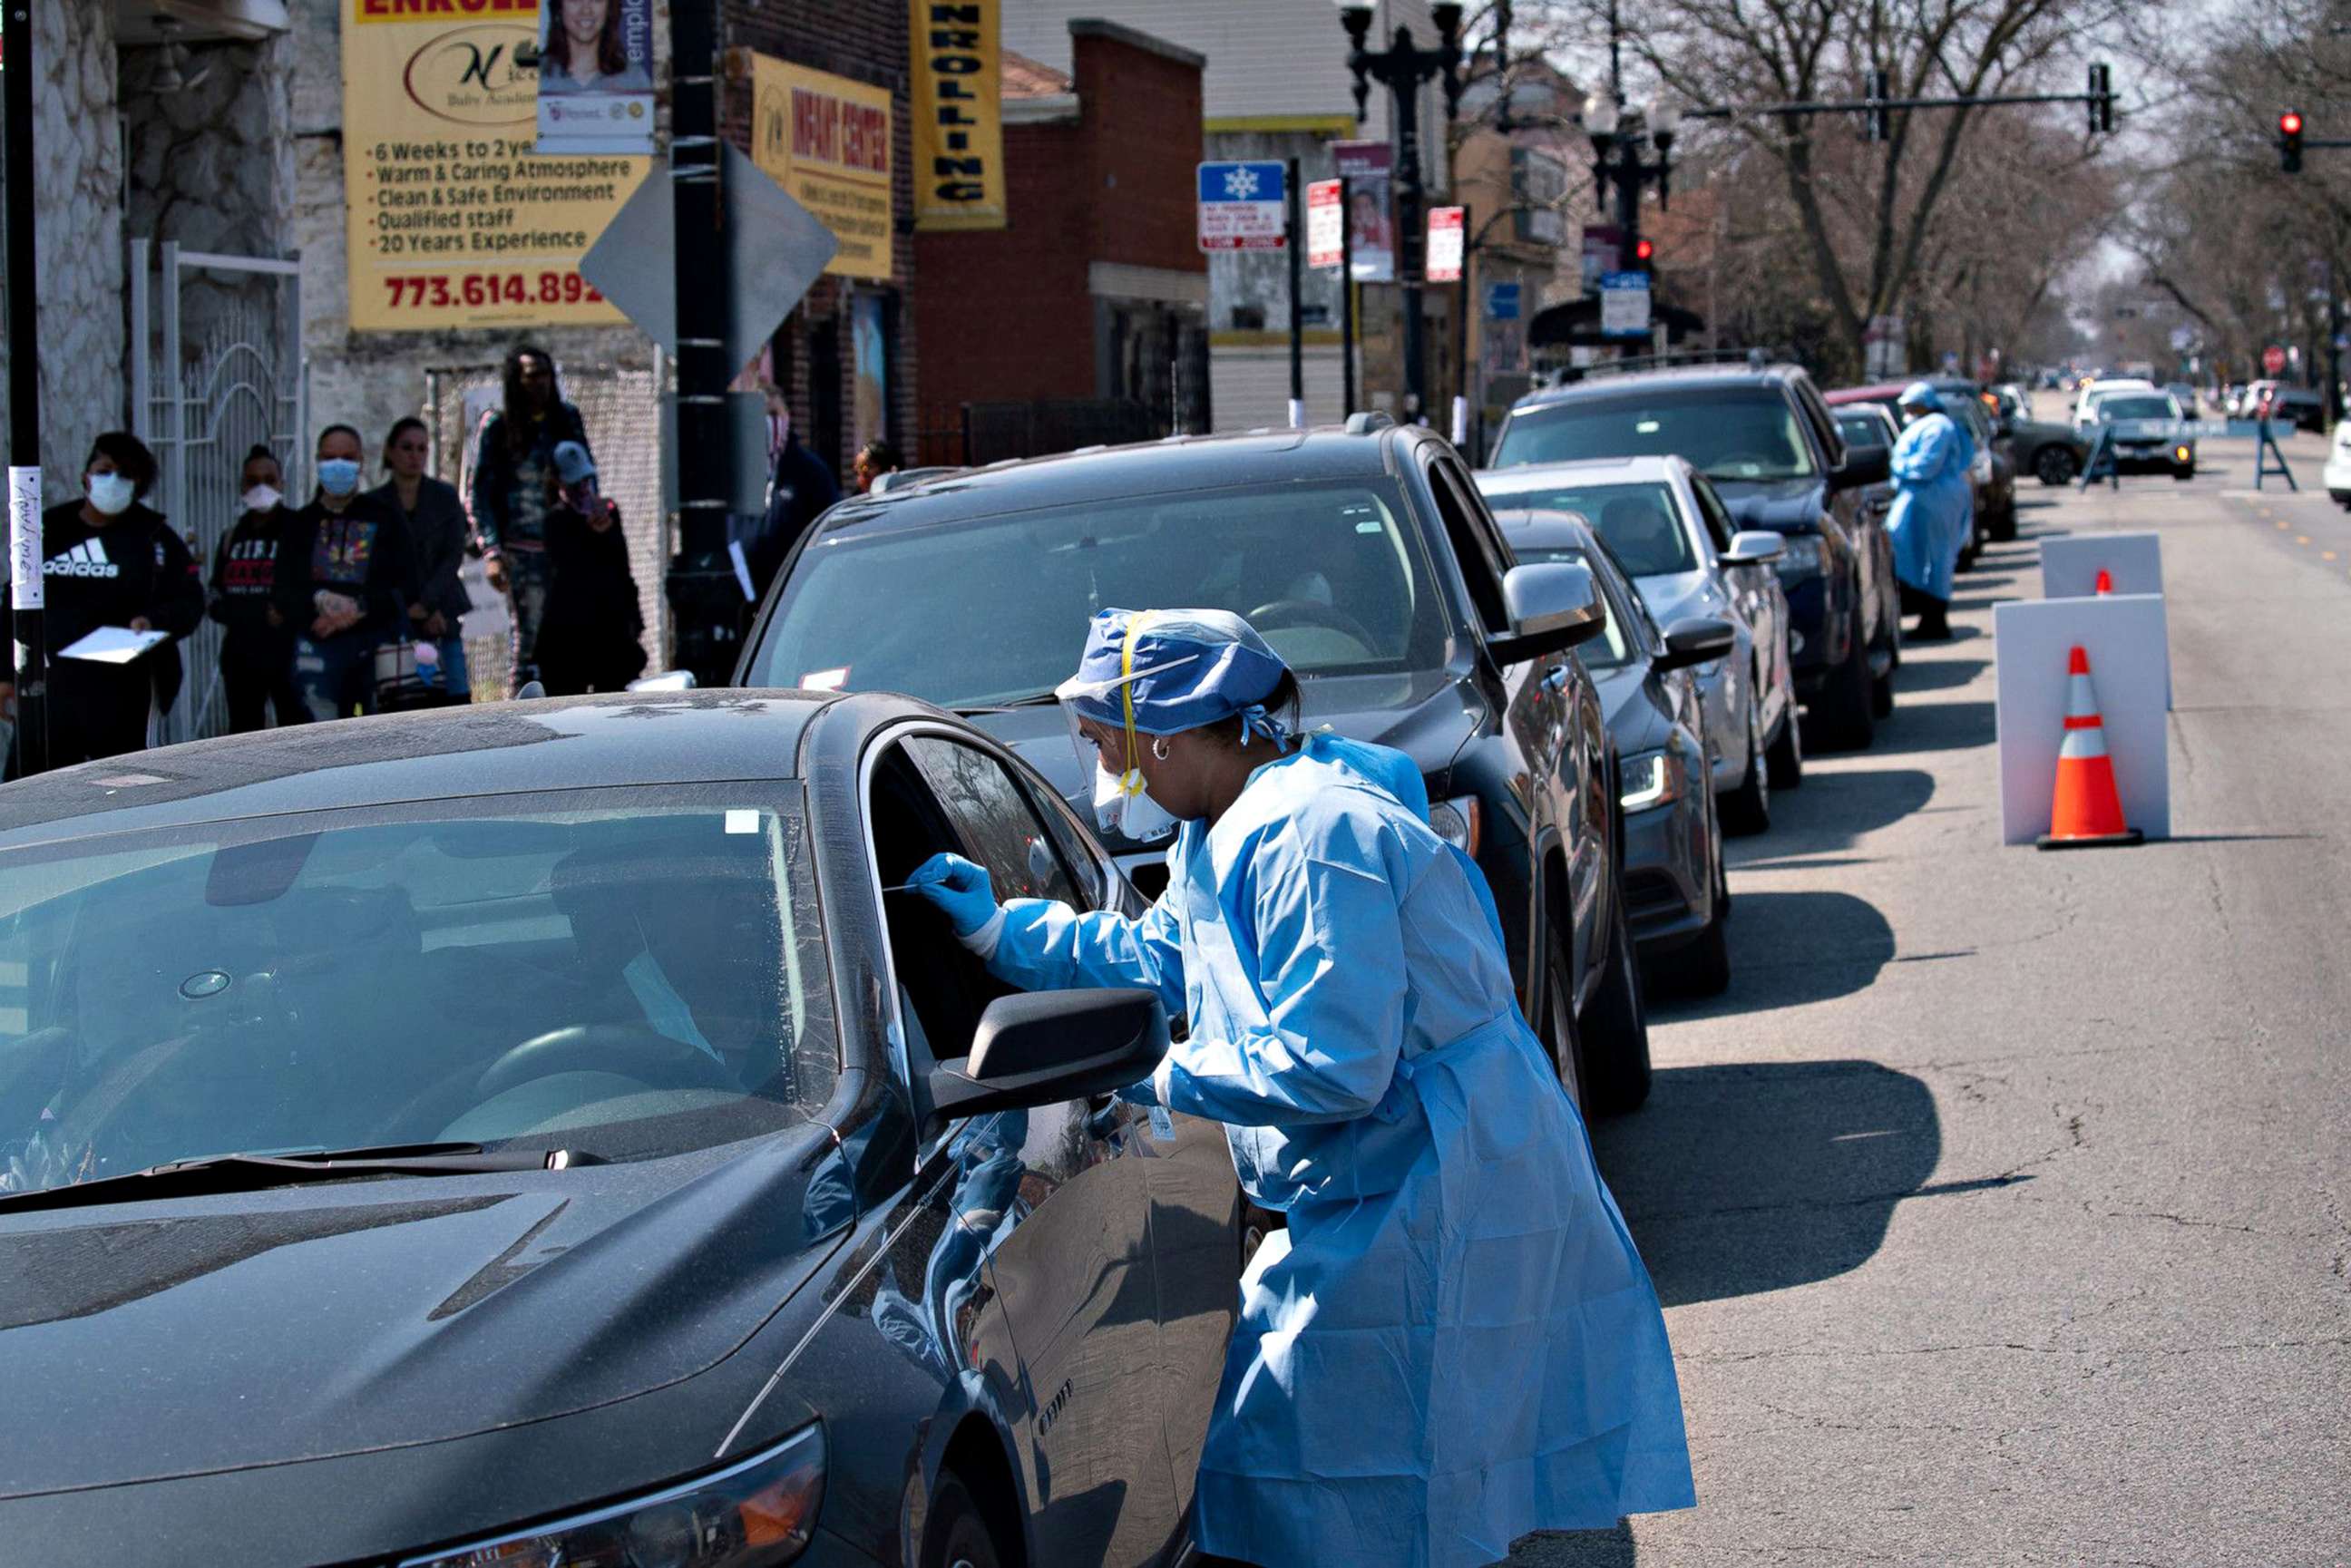 PHOTO: People wait in line in their cars to get tested for COVID-19 at Roseland Community Hospital in Chicago, on April 3, 2020.